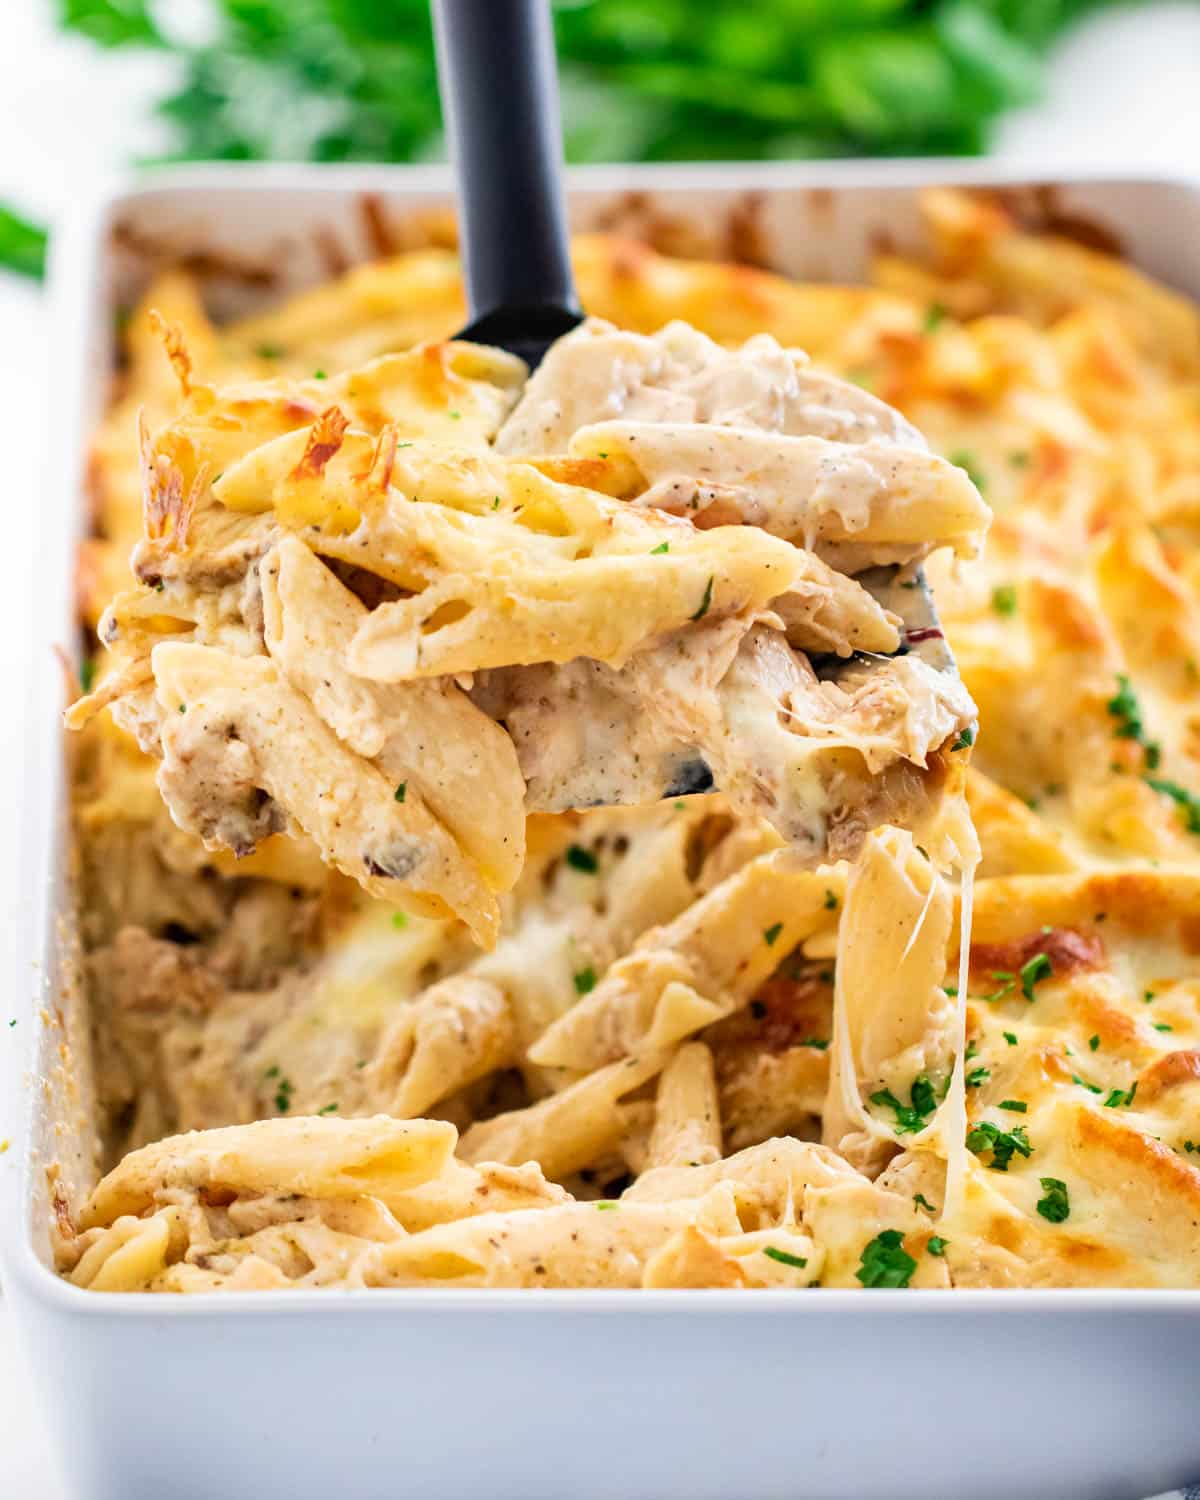 Chicken Alfredo Bake Craving Home Cooked